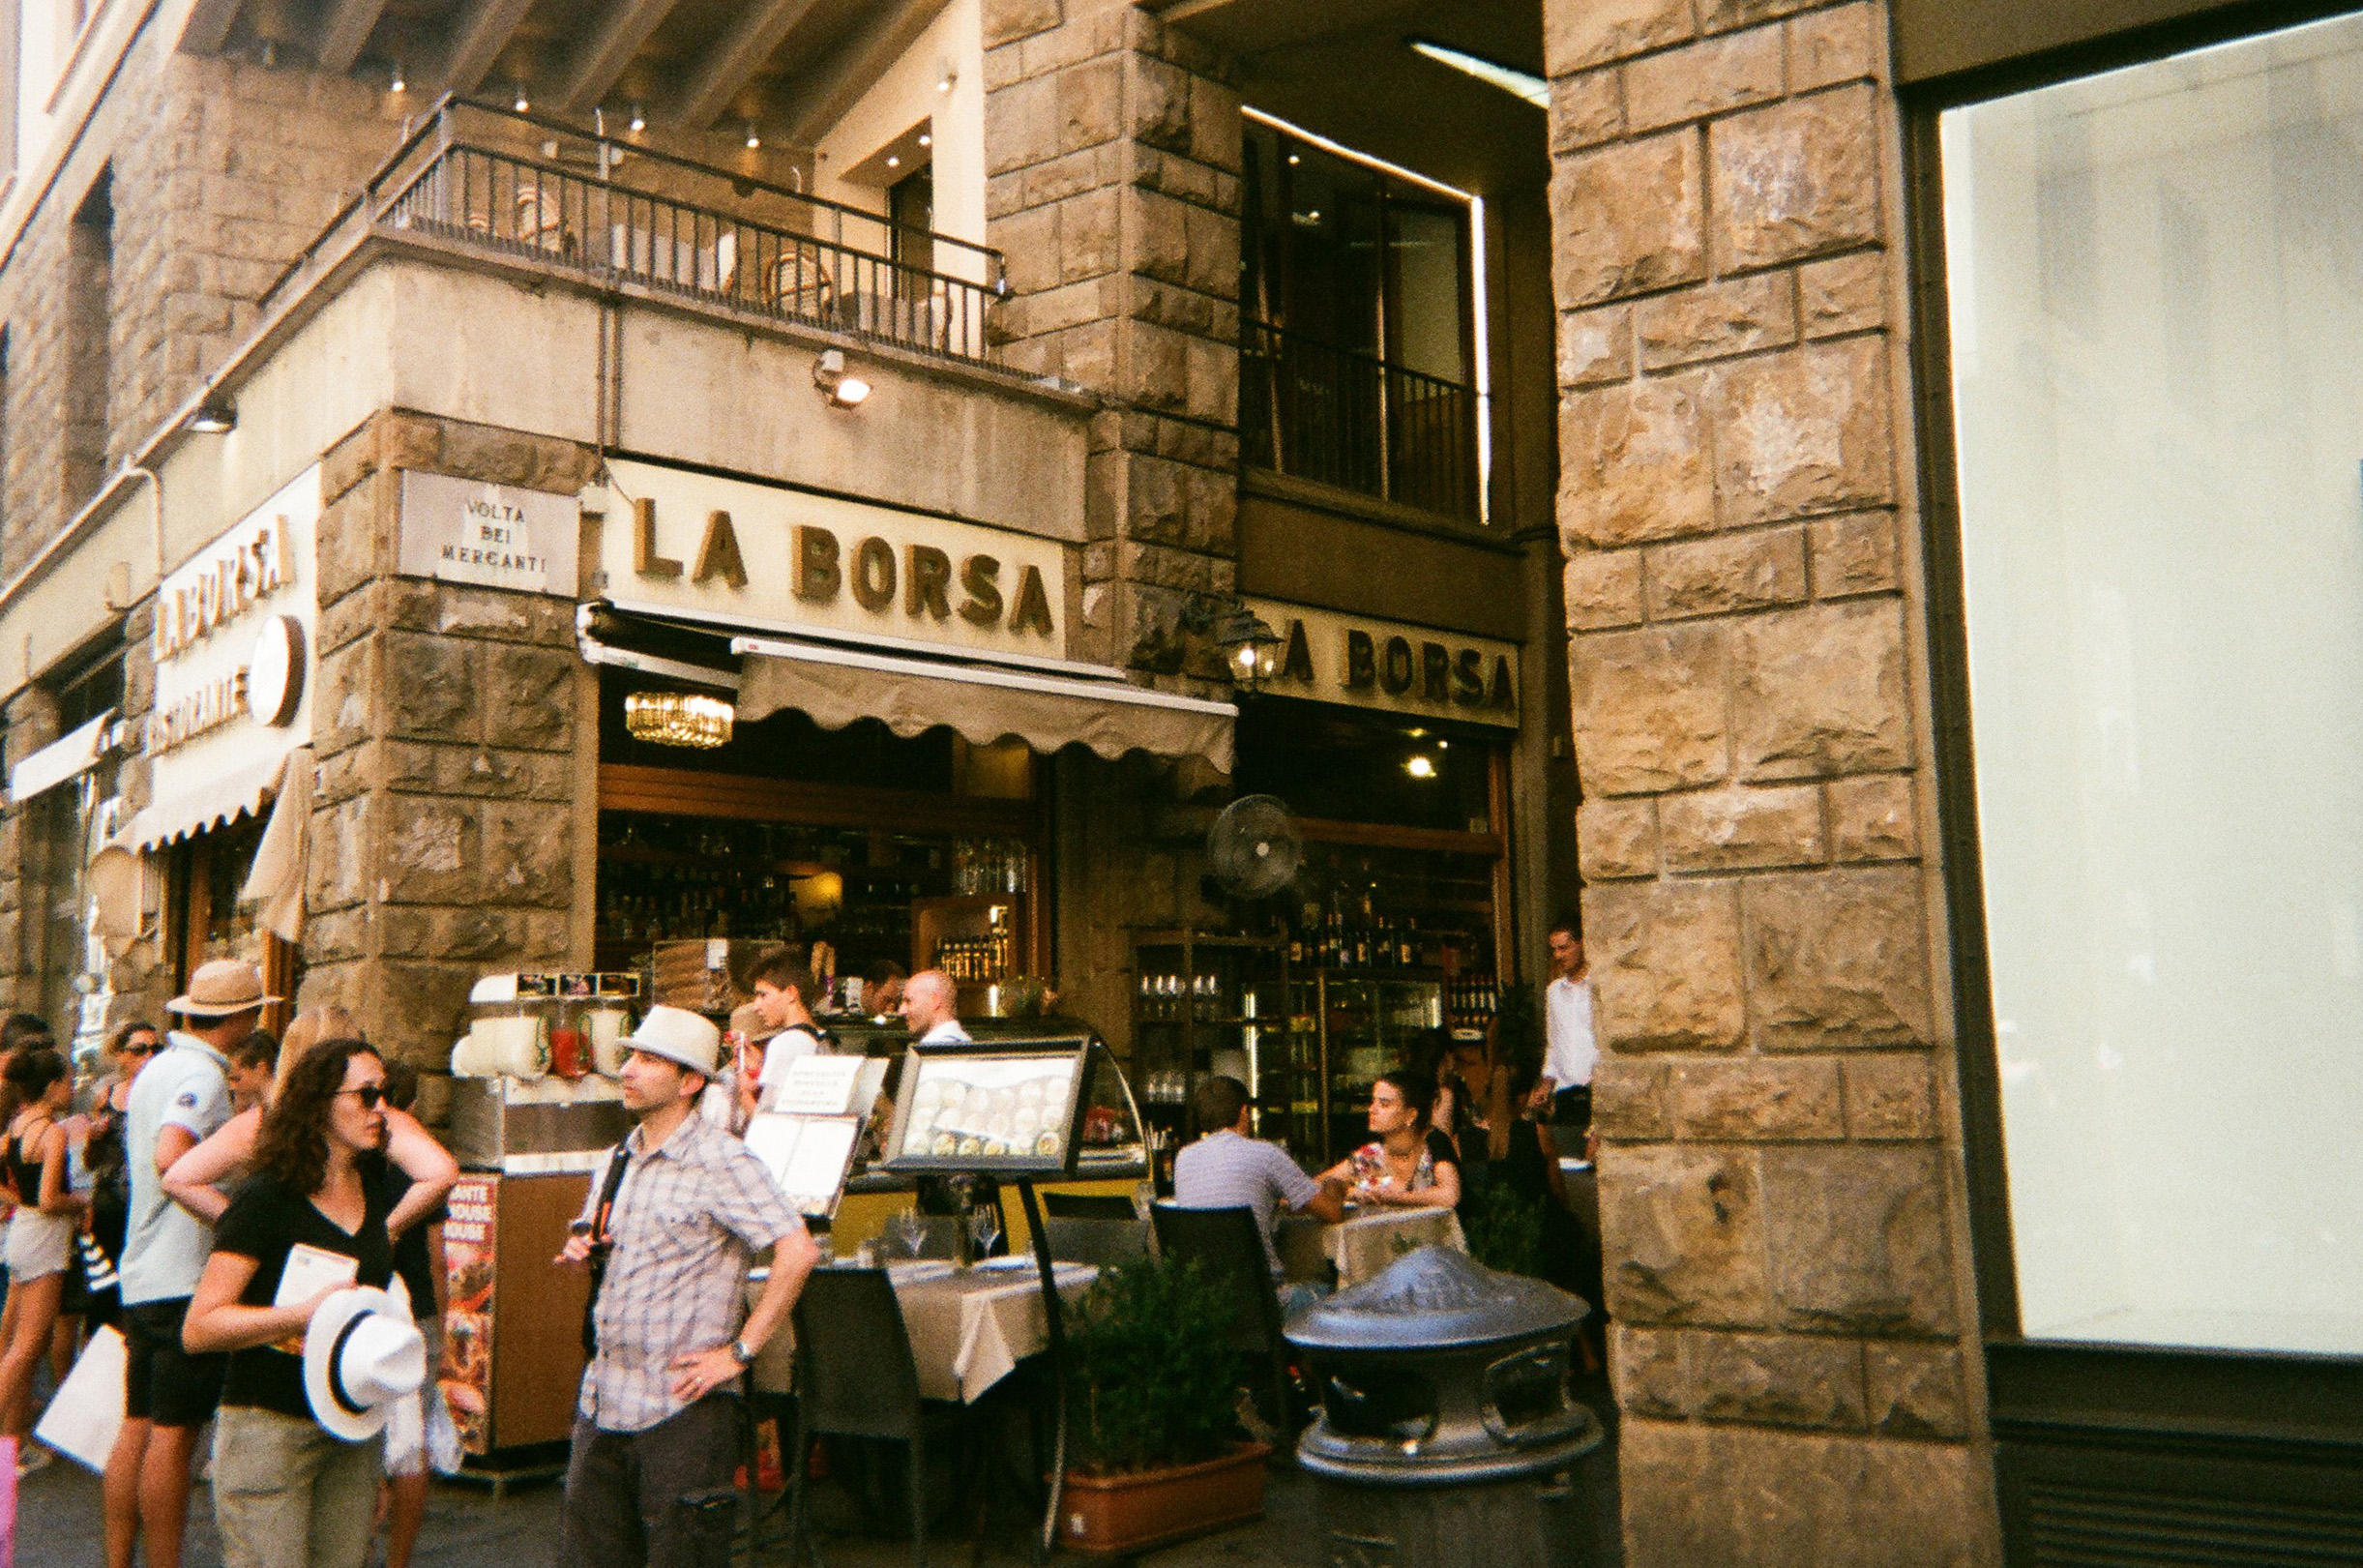 Florence, Italy by Abby Ingwersen